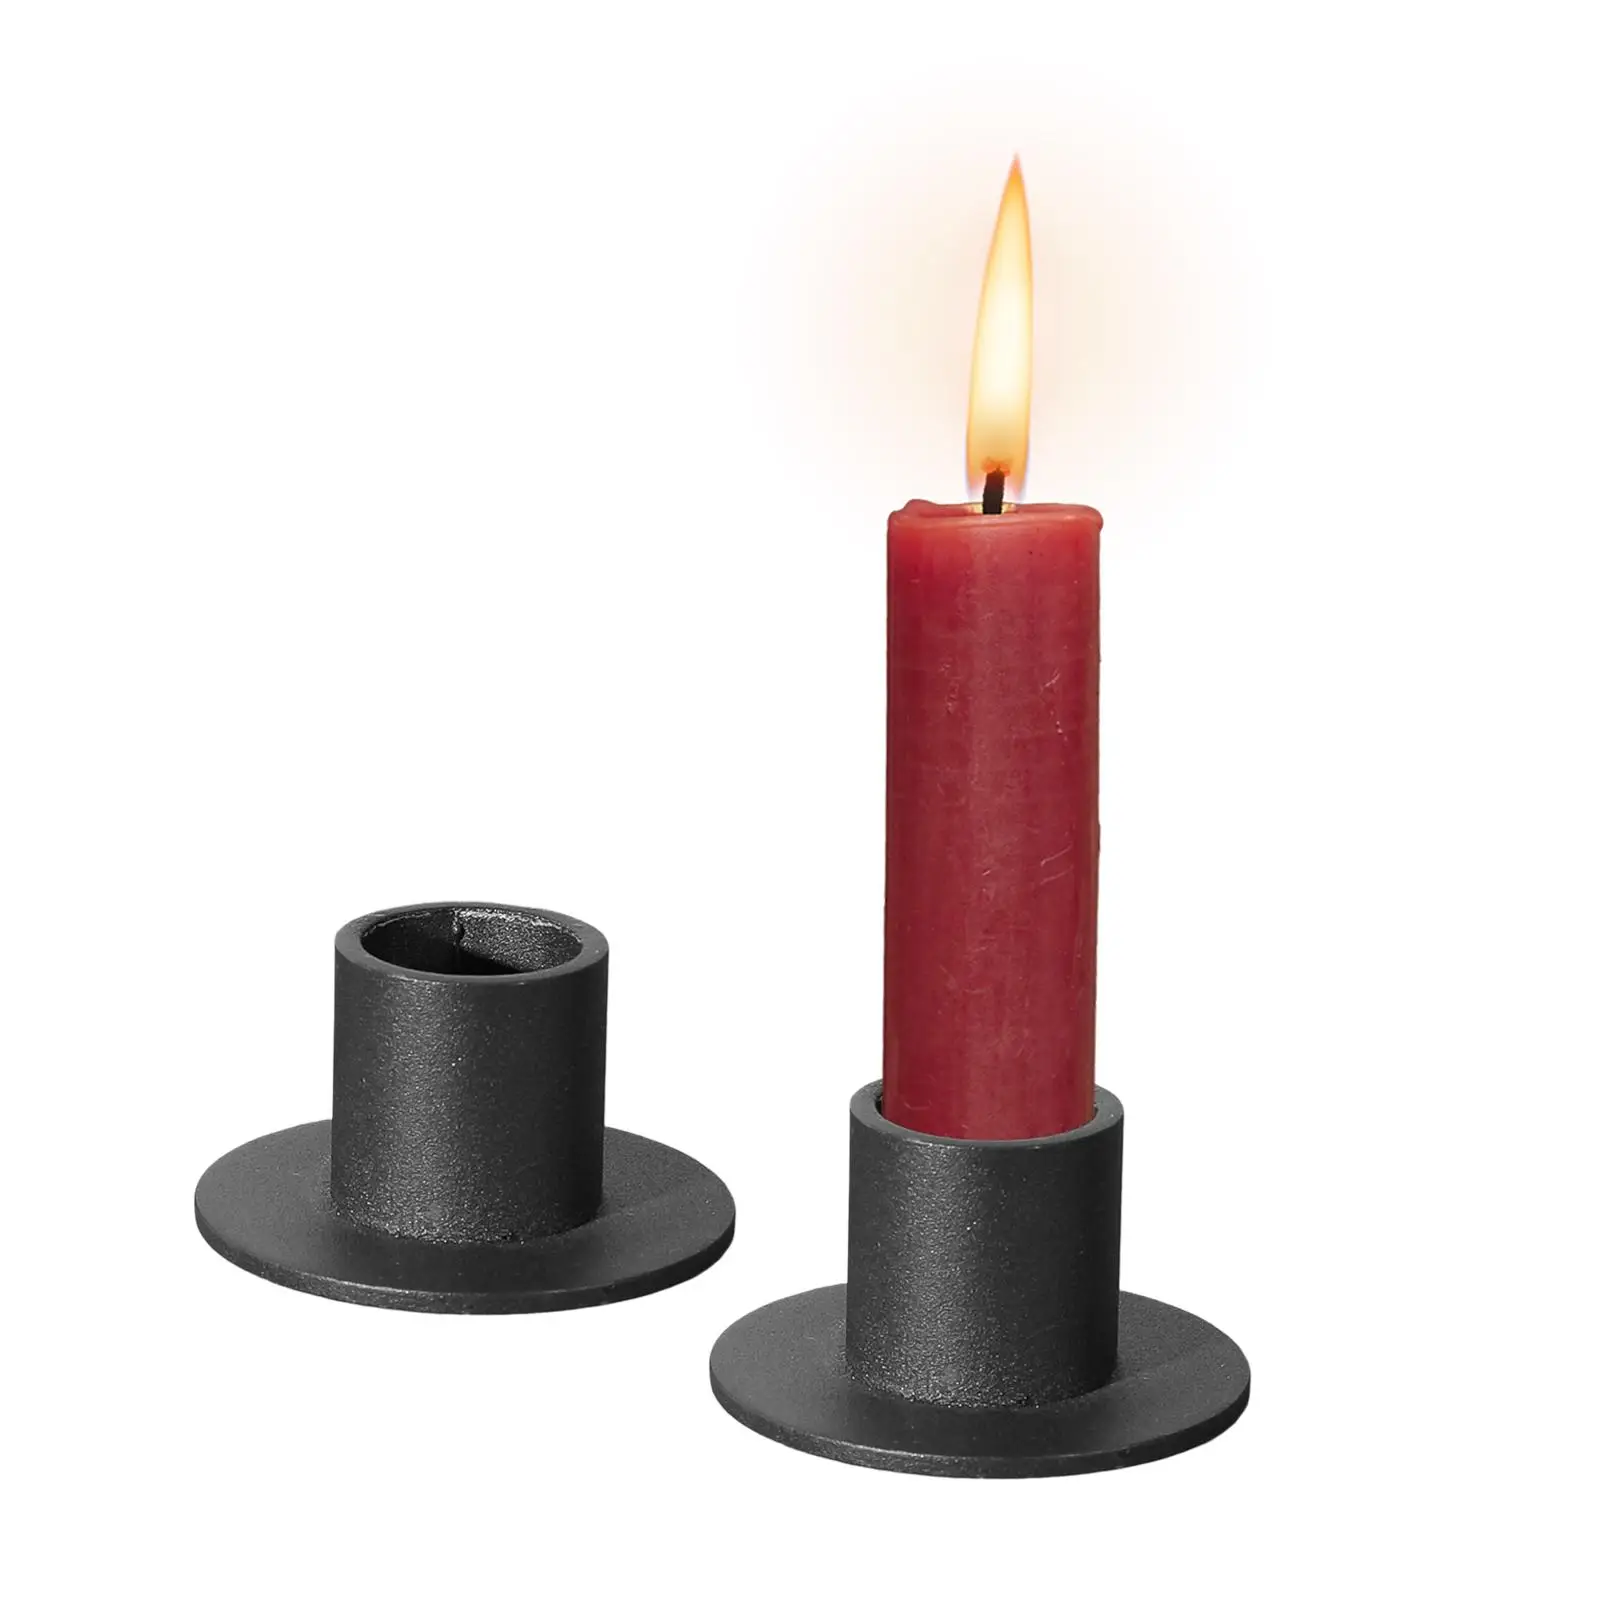 2 Pieces Nordic Pillar Candle Holder Candlestick Decoration Candle Stand for Table Centerpiece Wedding Holiday Party Home